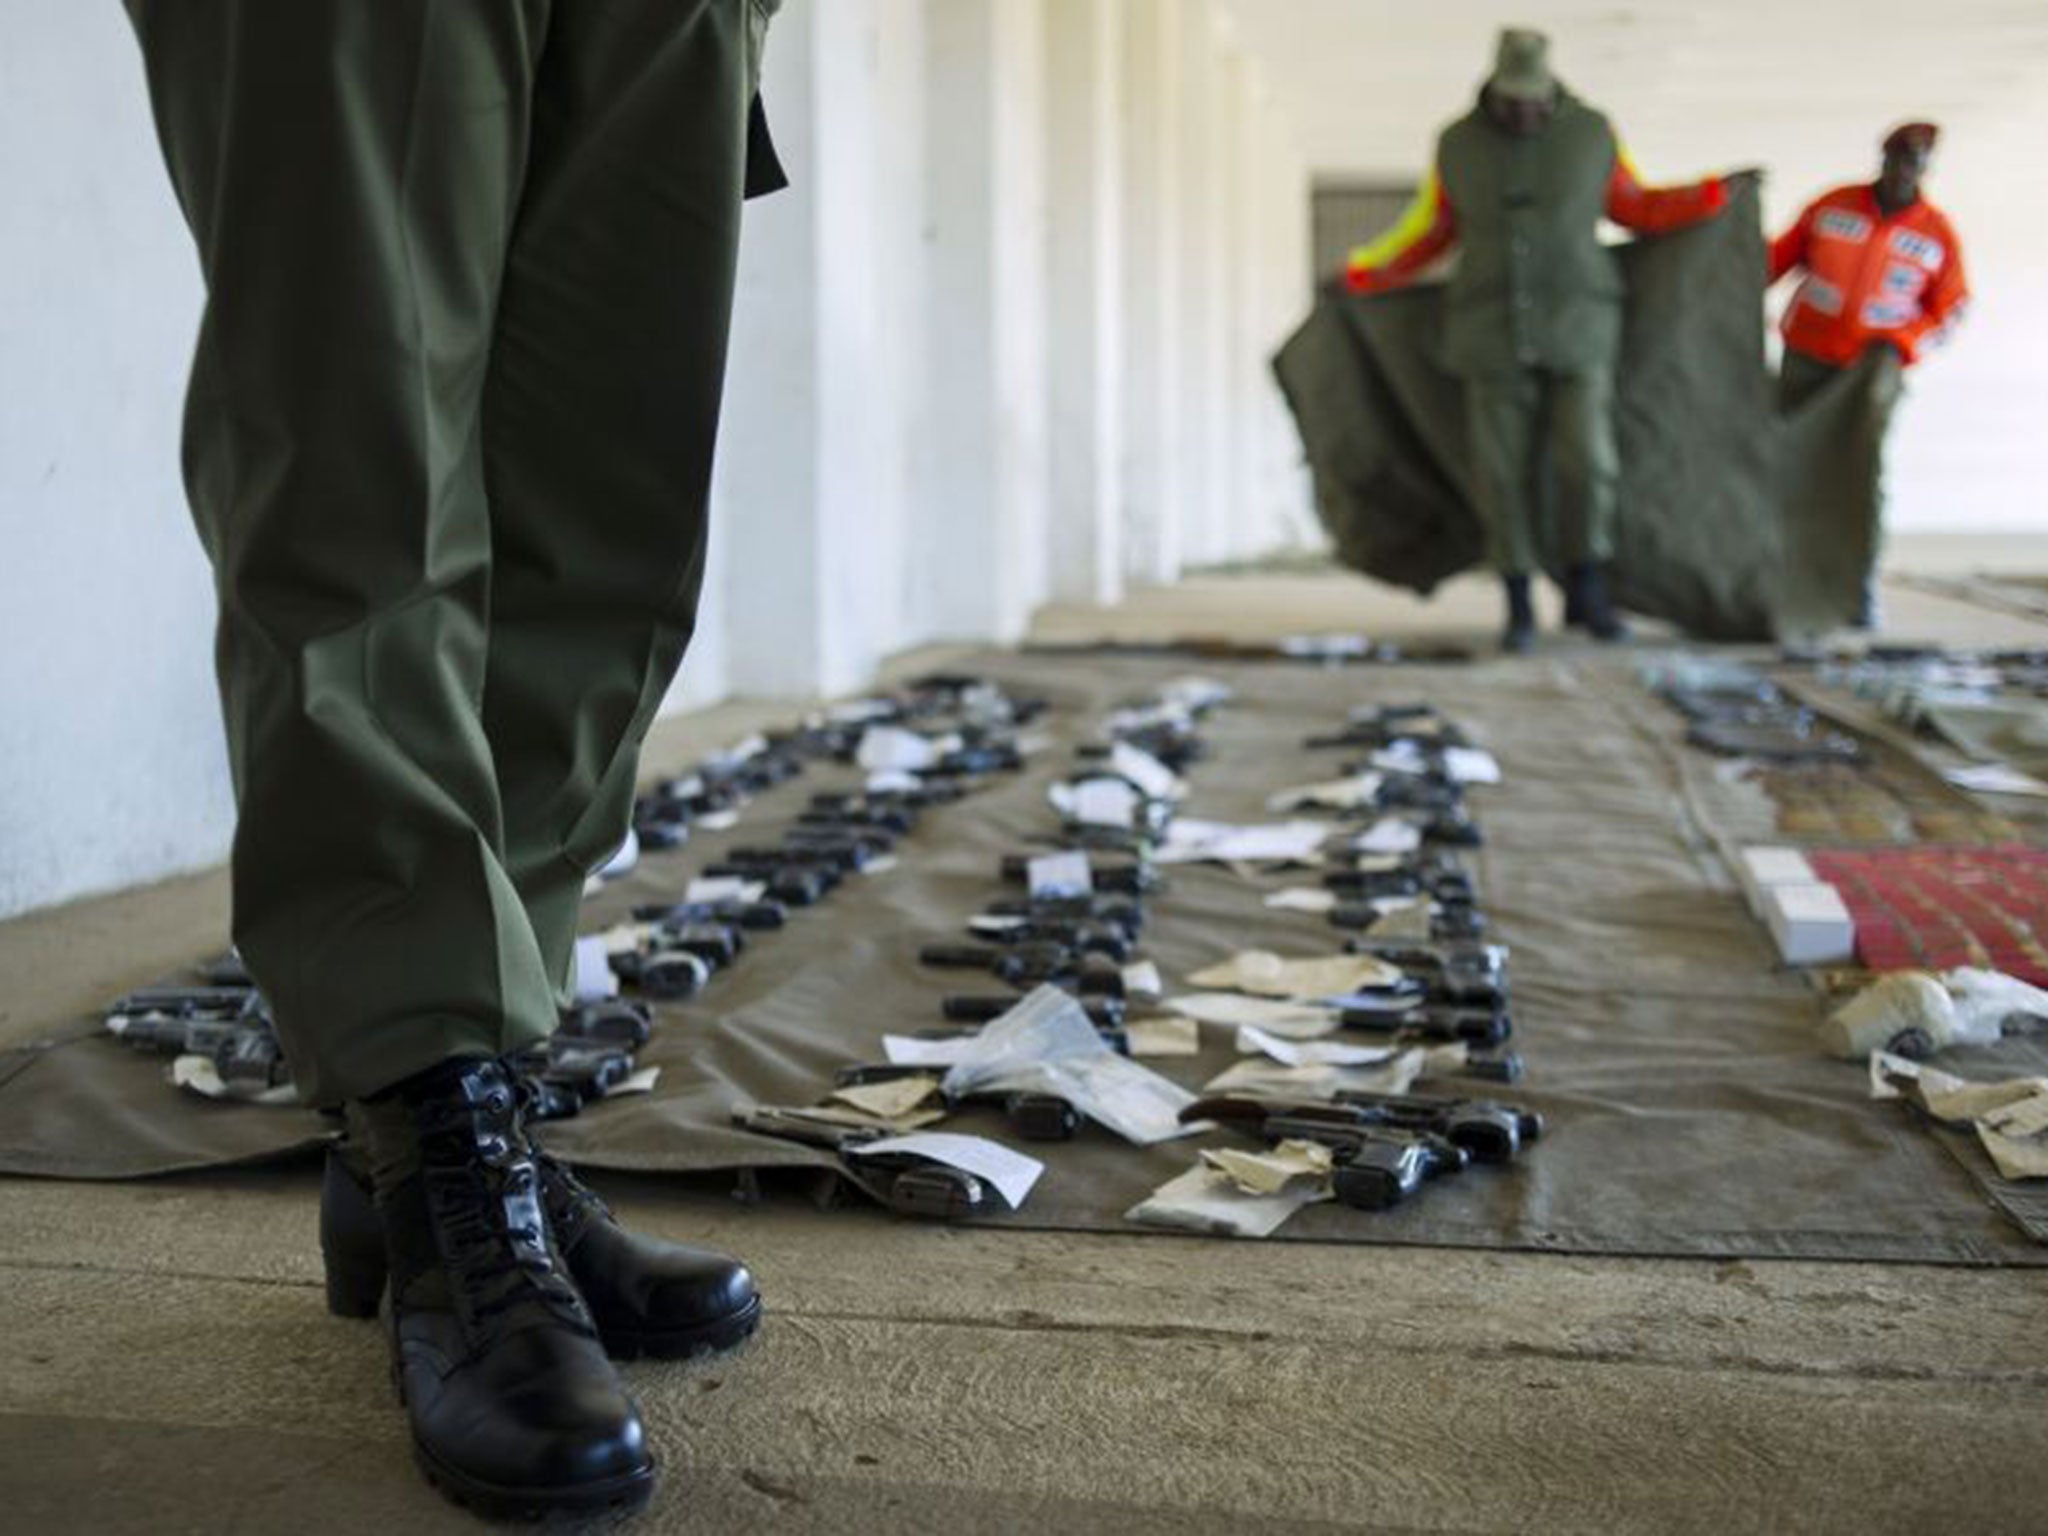 Soldiers confiscated firearms and explosives after the military raided police installations